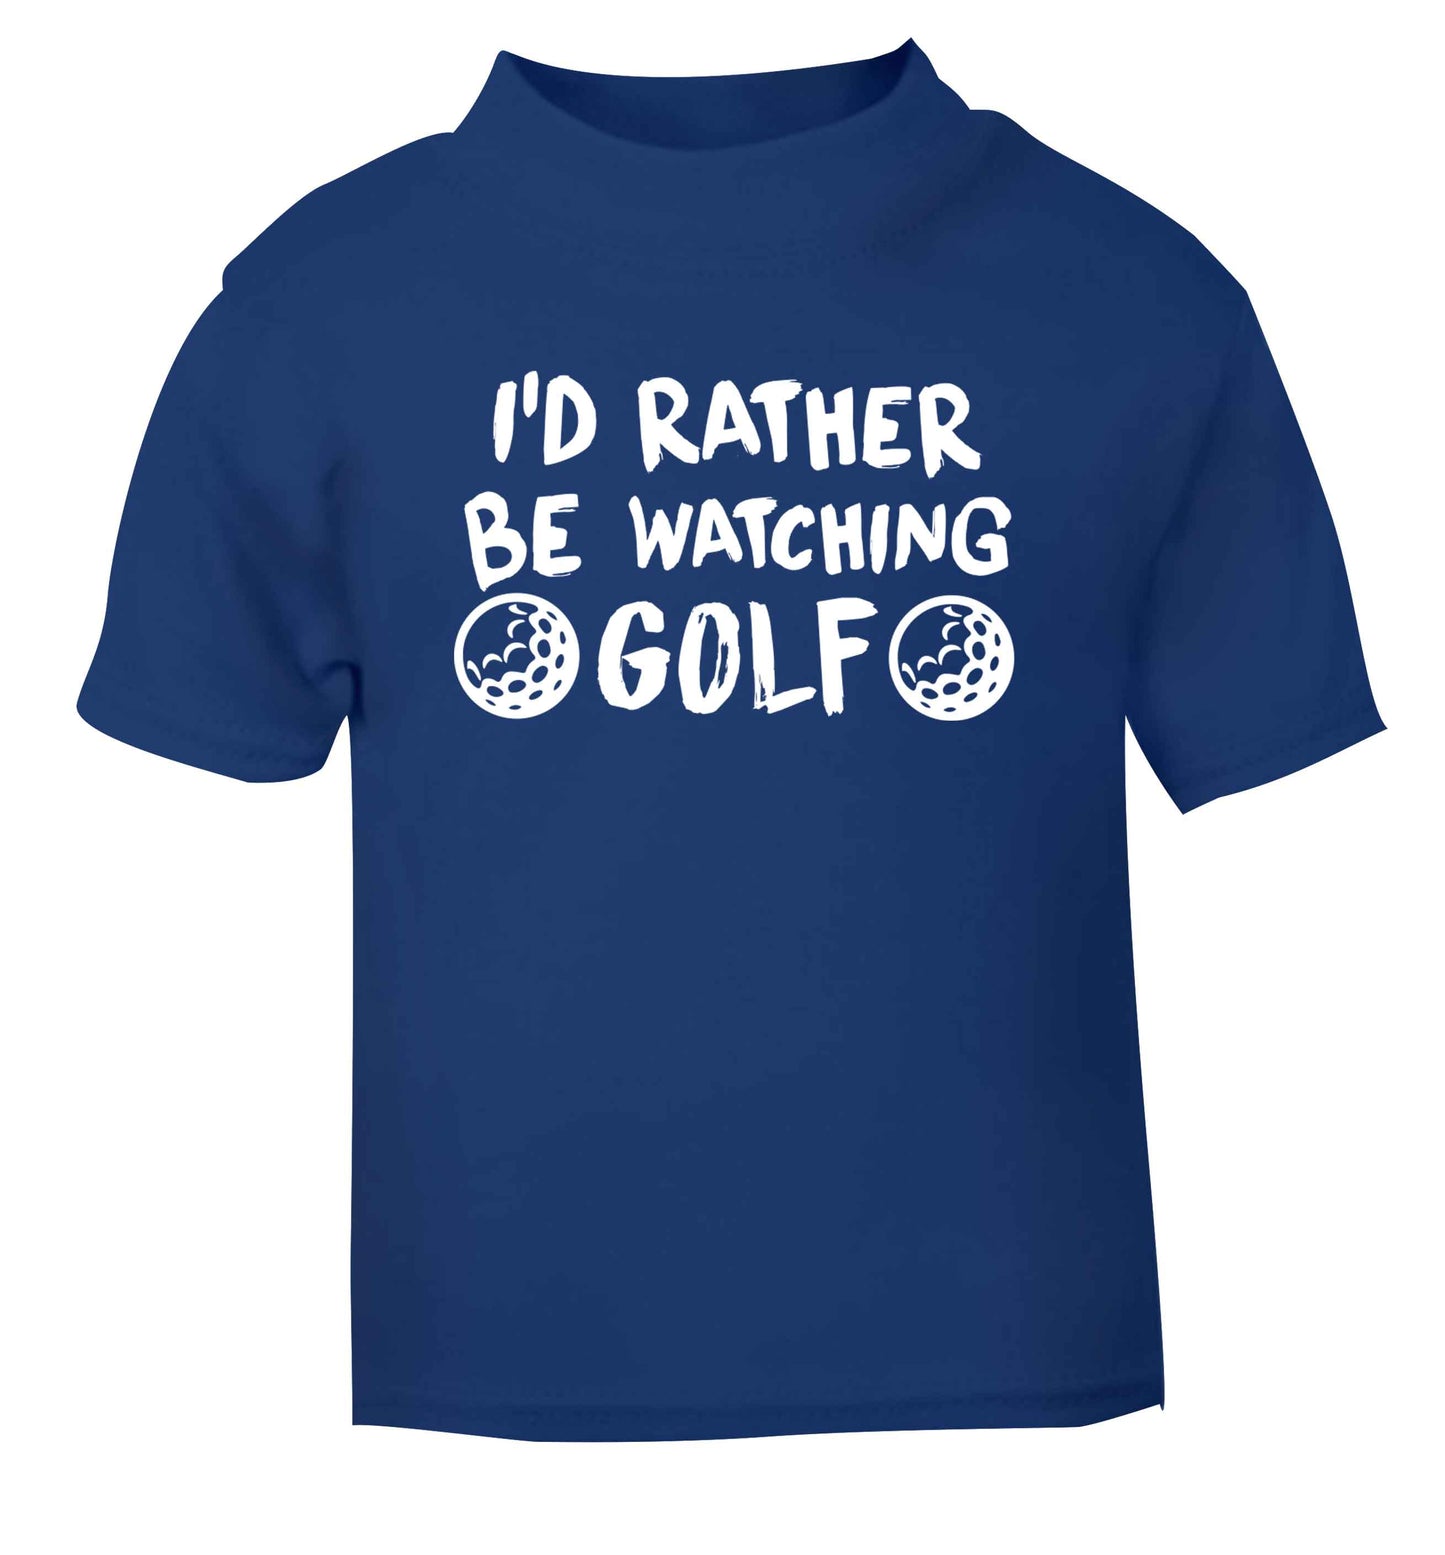 I'd rather be watching golf blue Baby Toddler Tshirt 2 Years